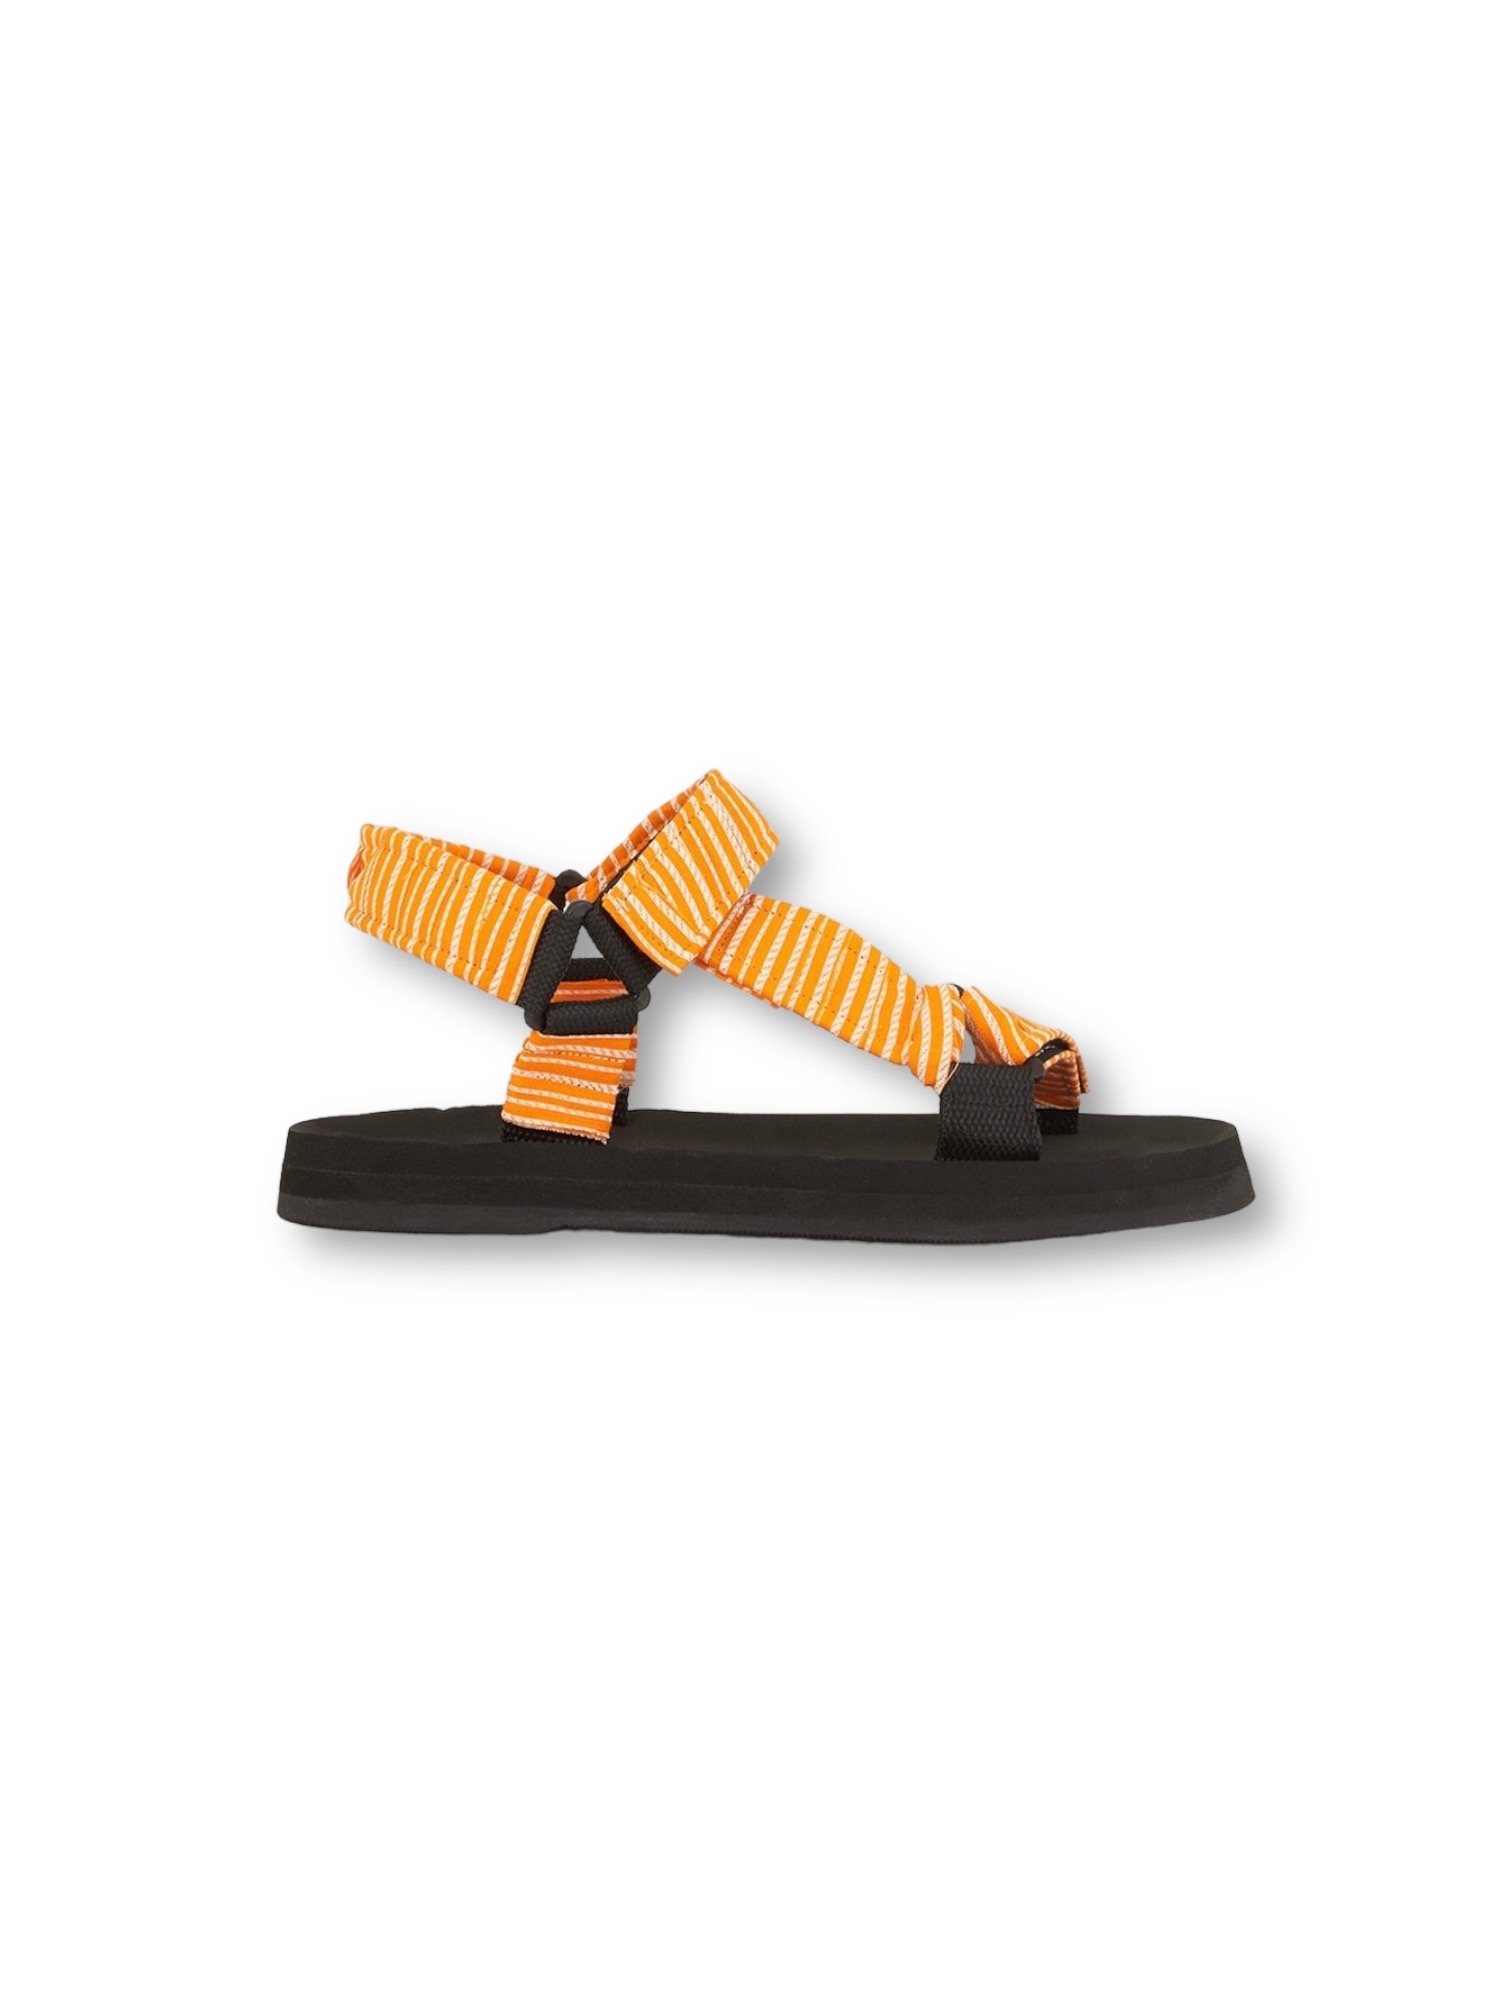 SANDALS “CANYON”